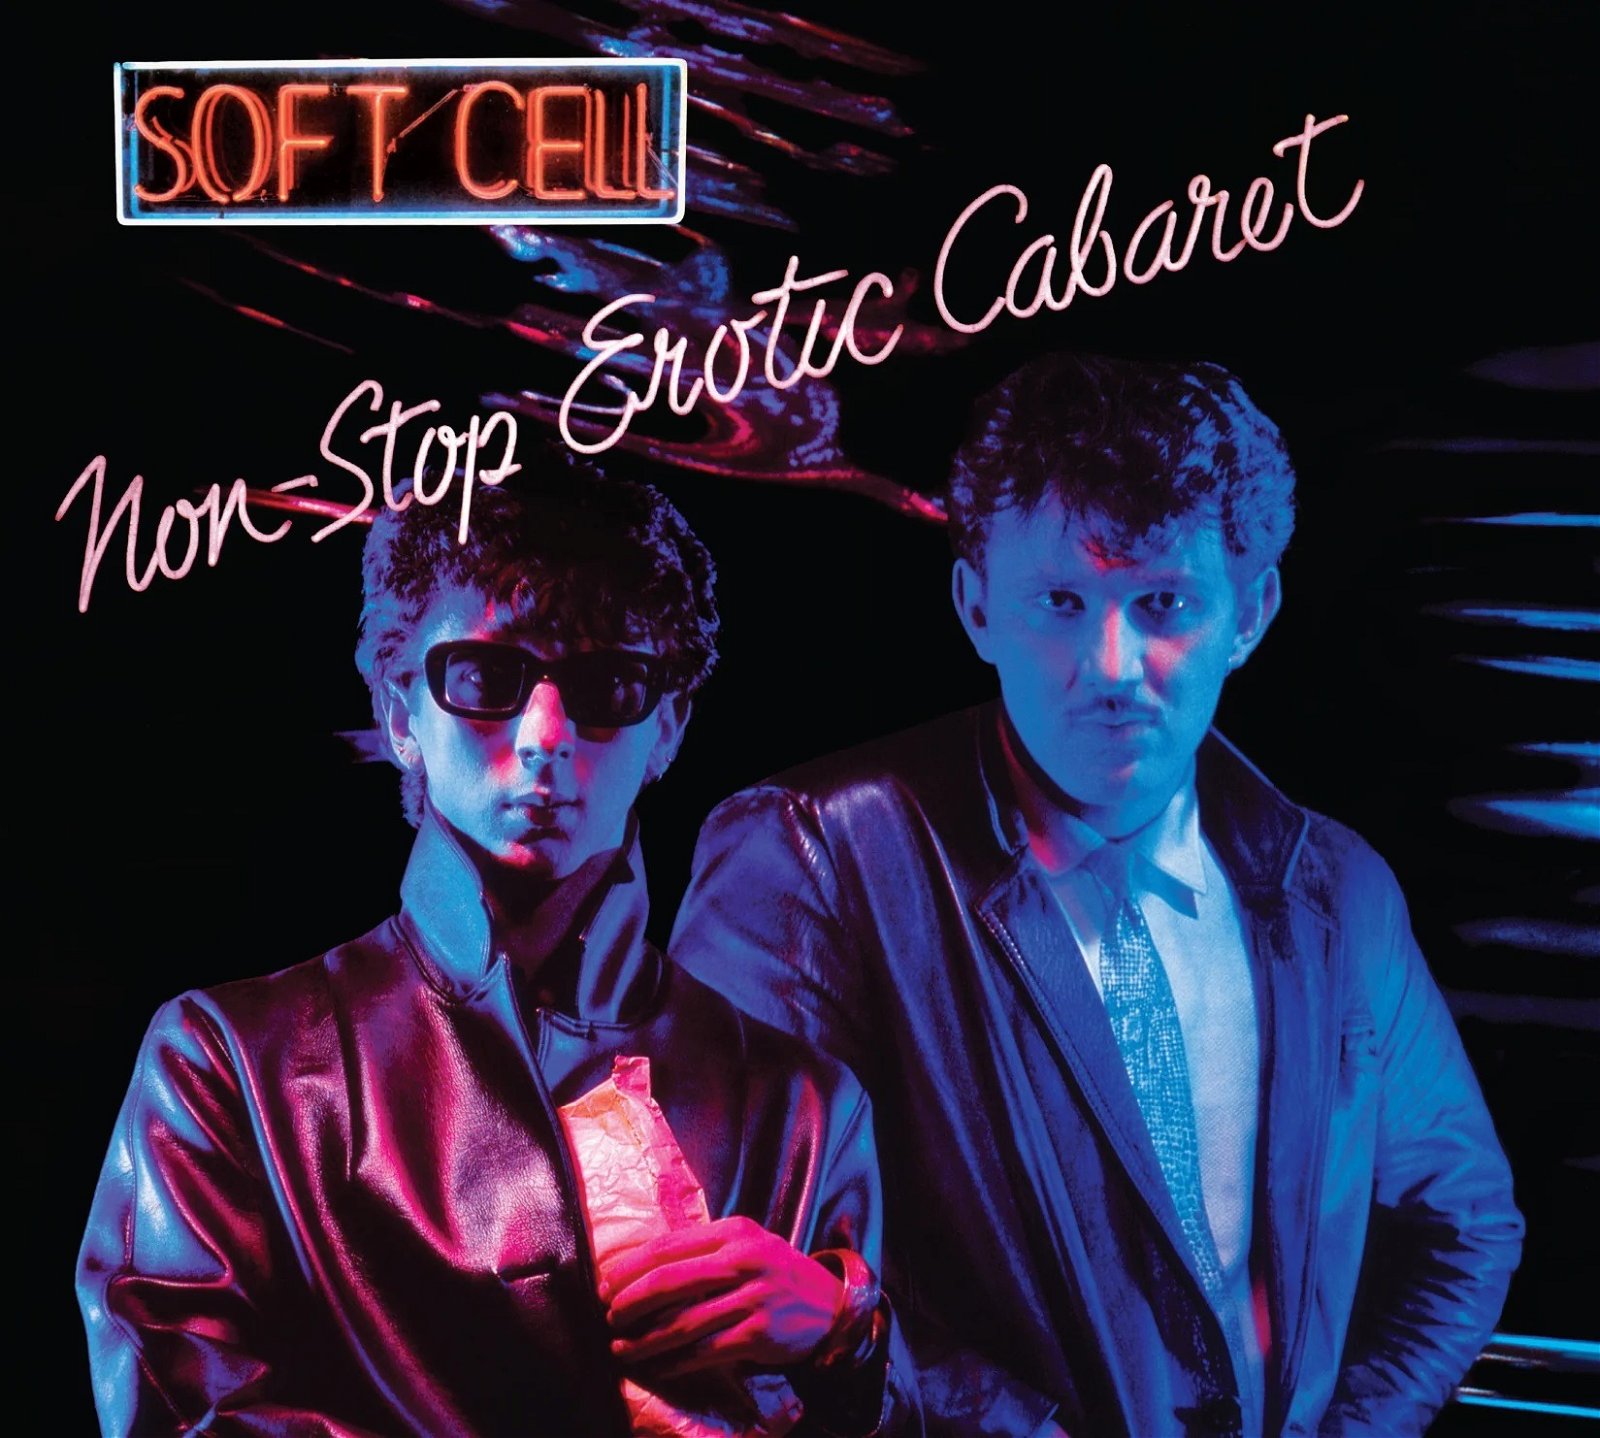 CD Shop - SOFT CELL NON-STOP EROTIC CABARET